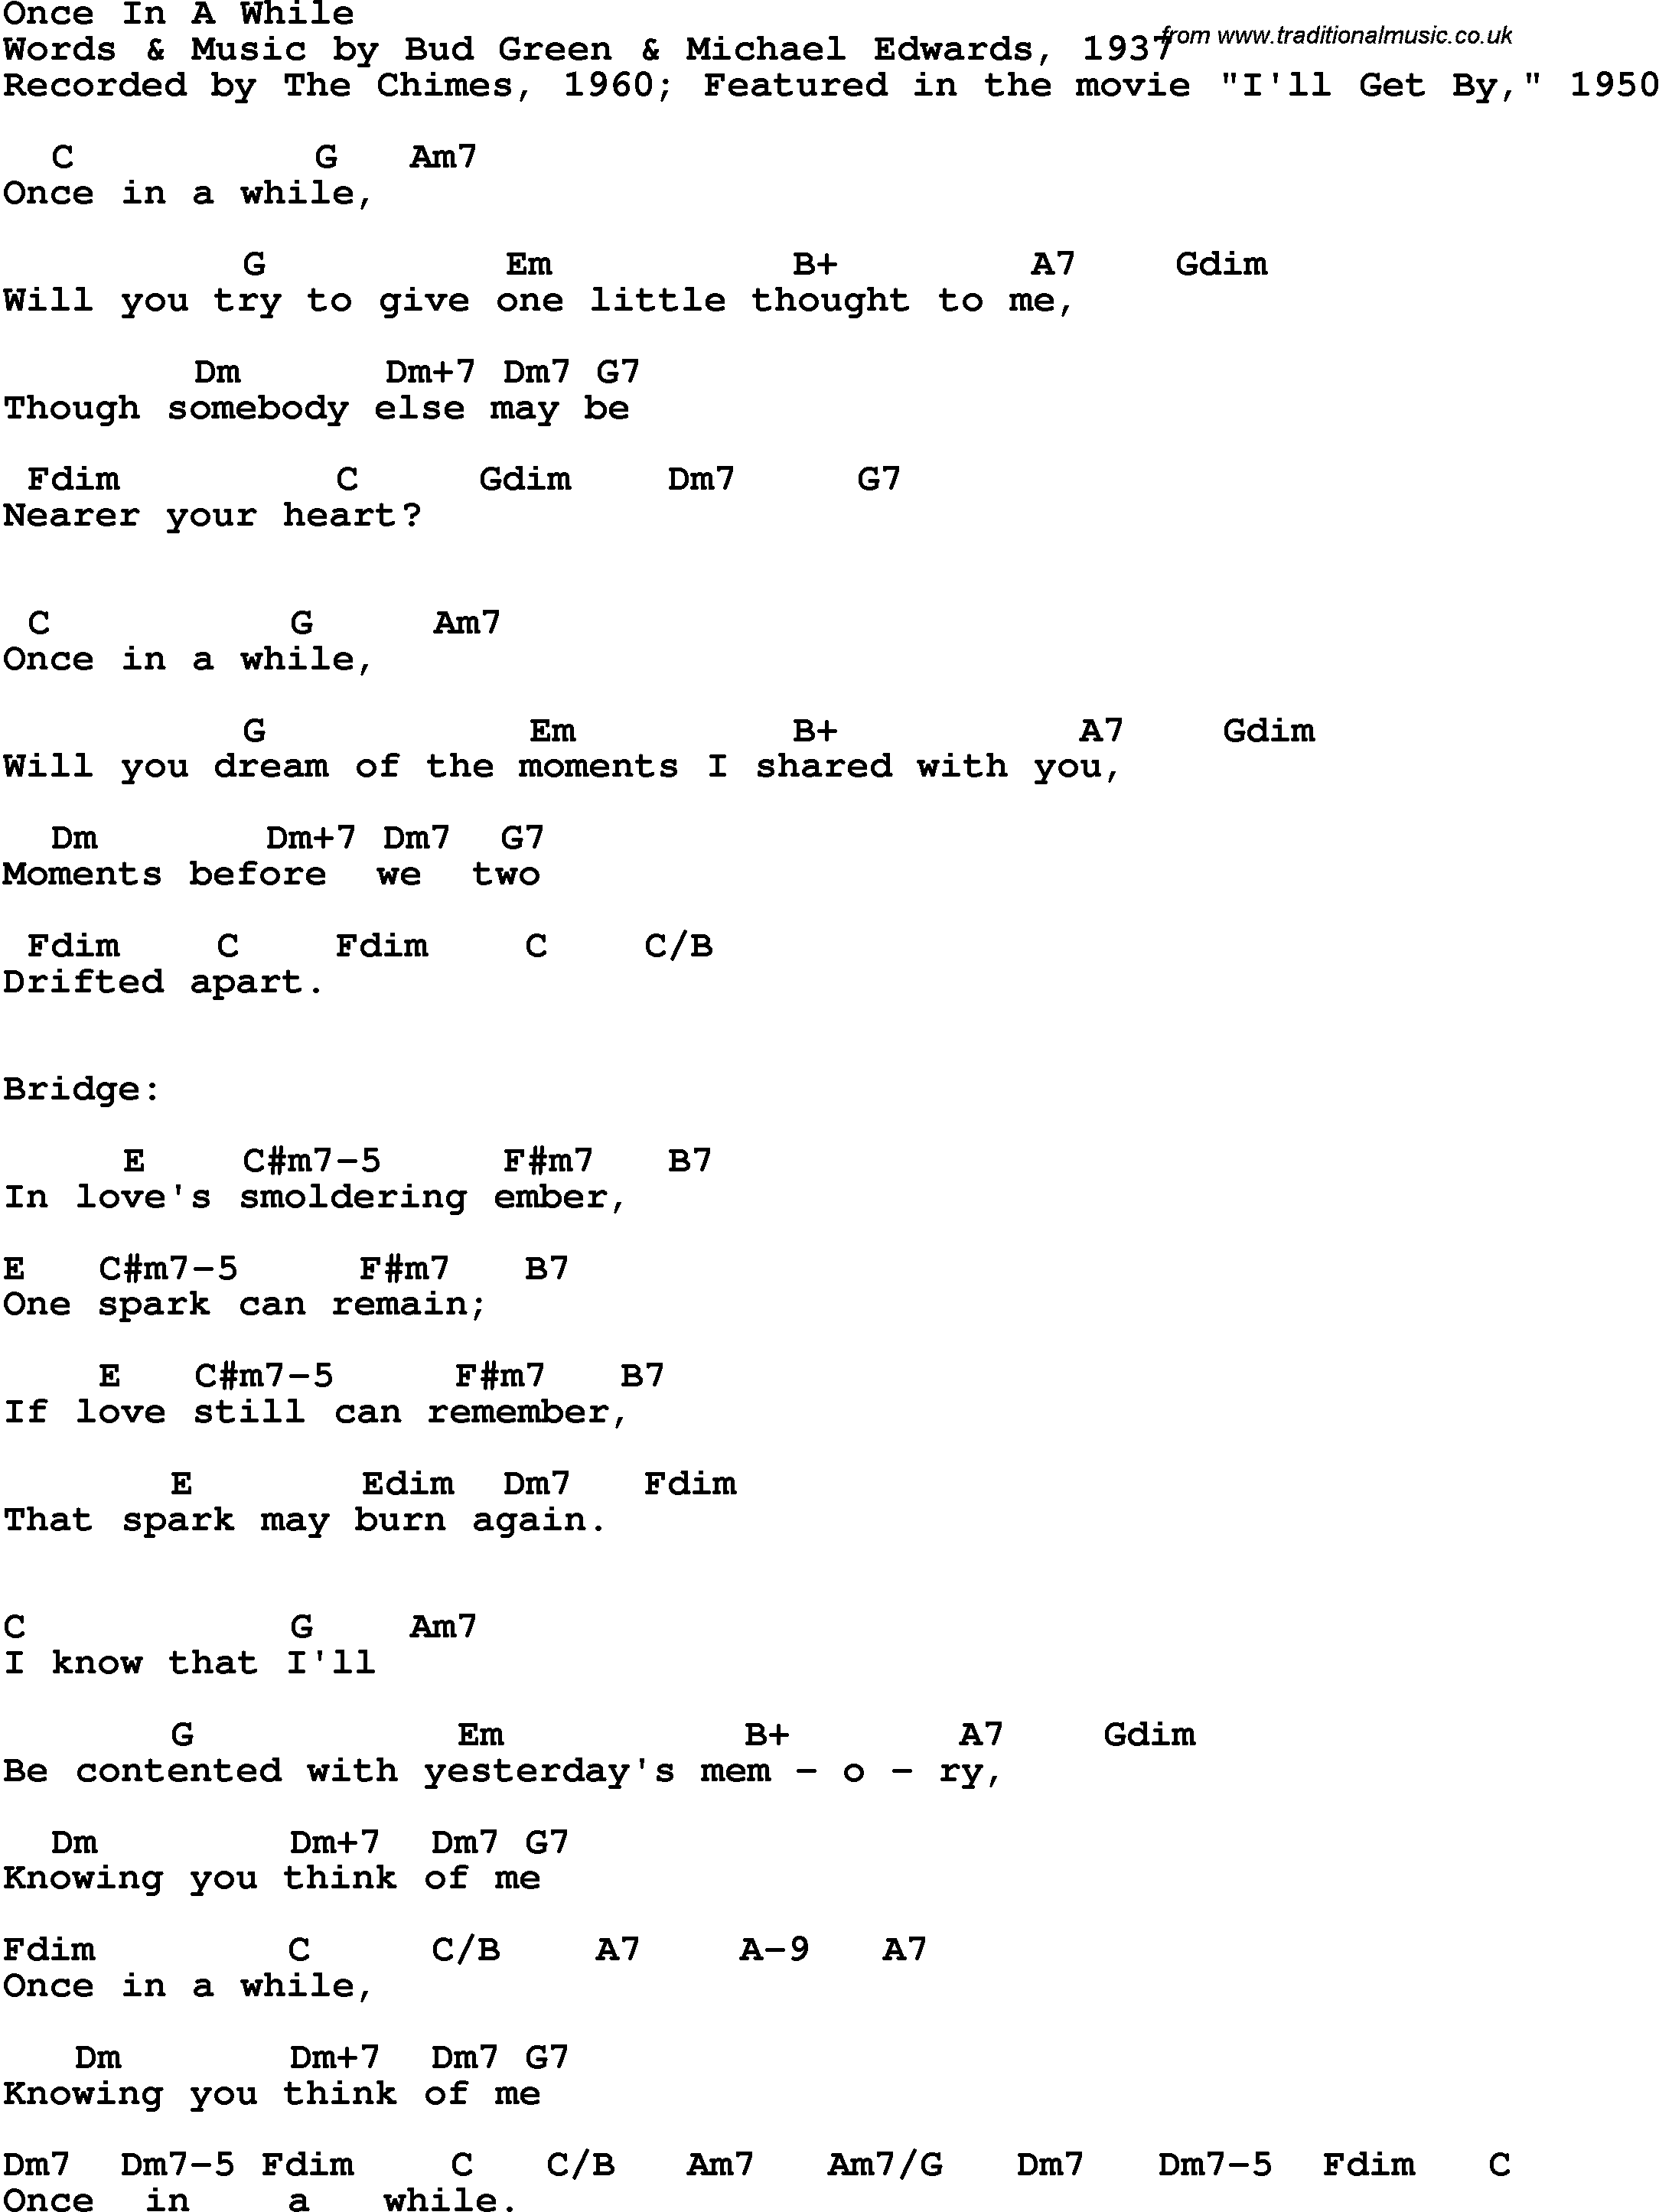 Song Lyrics with guitar chords for Once In A While - The Chimes, 1960